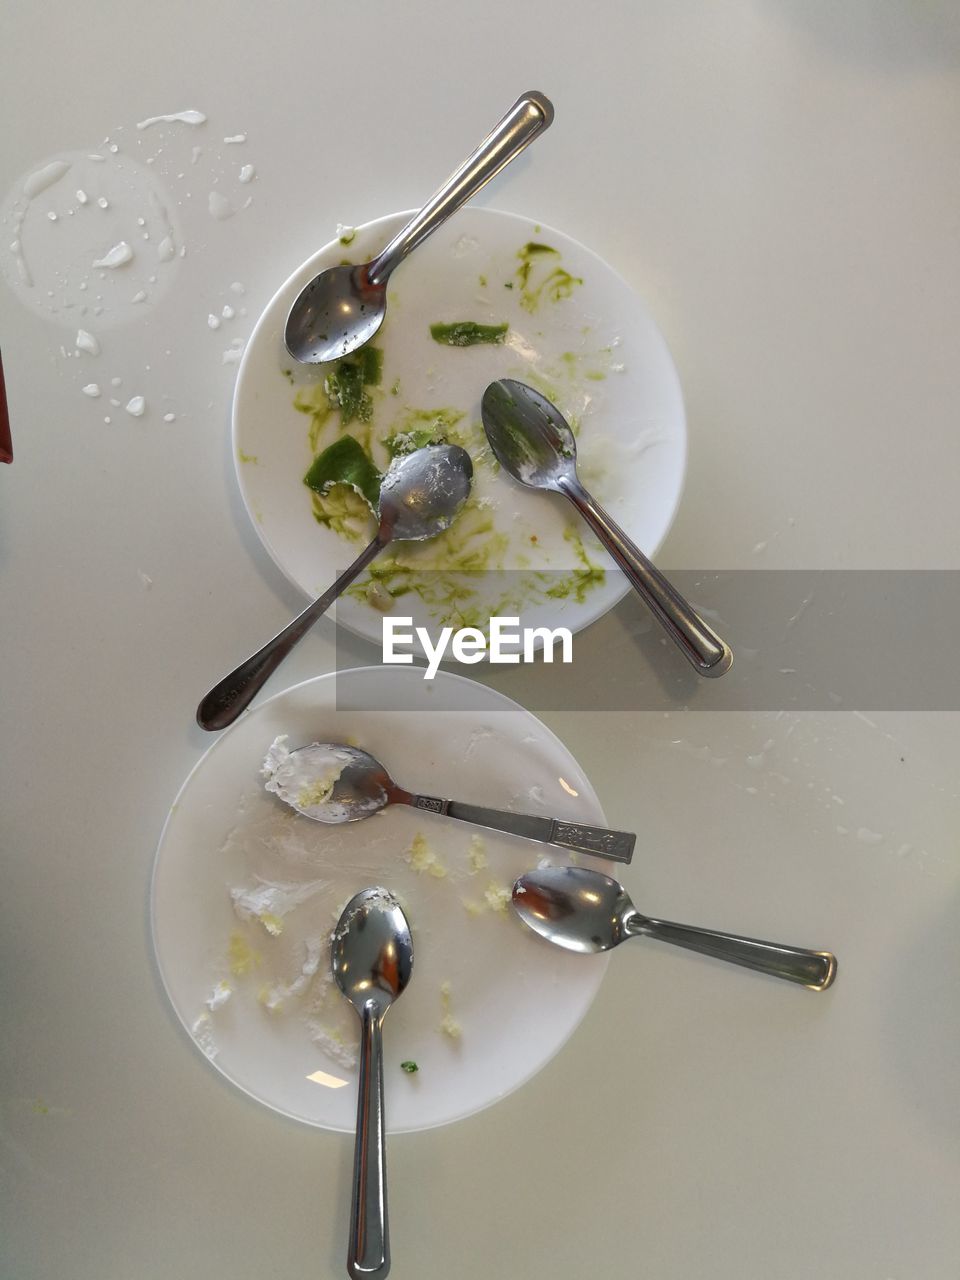 HIGH ANGLE VIEW OF FOOD IN PLATE